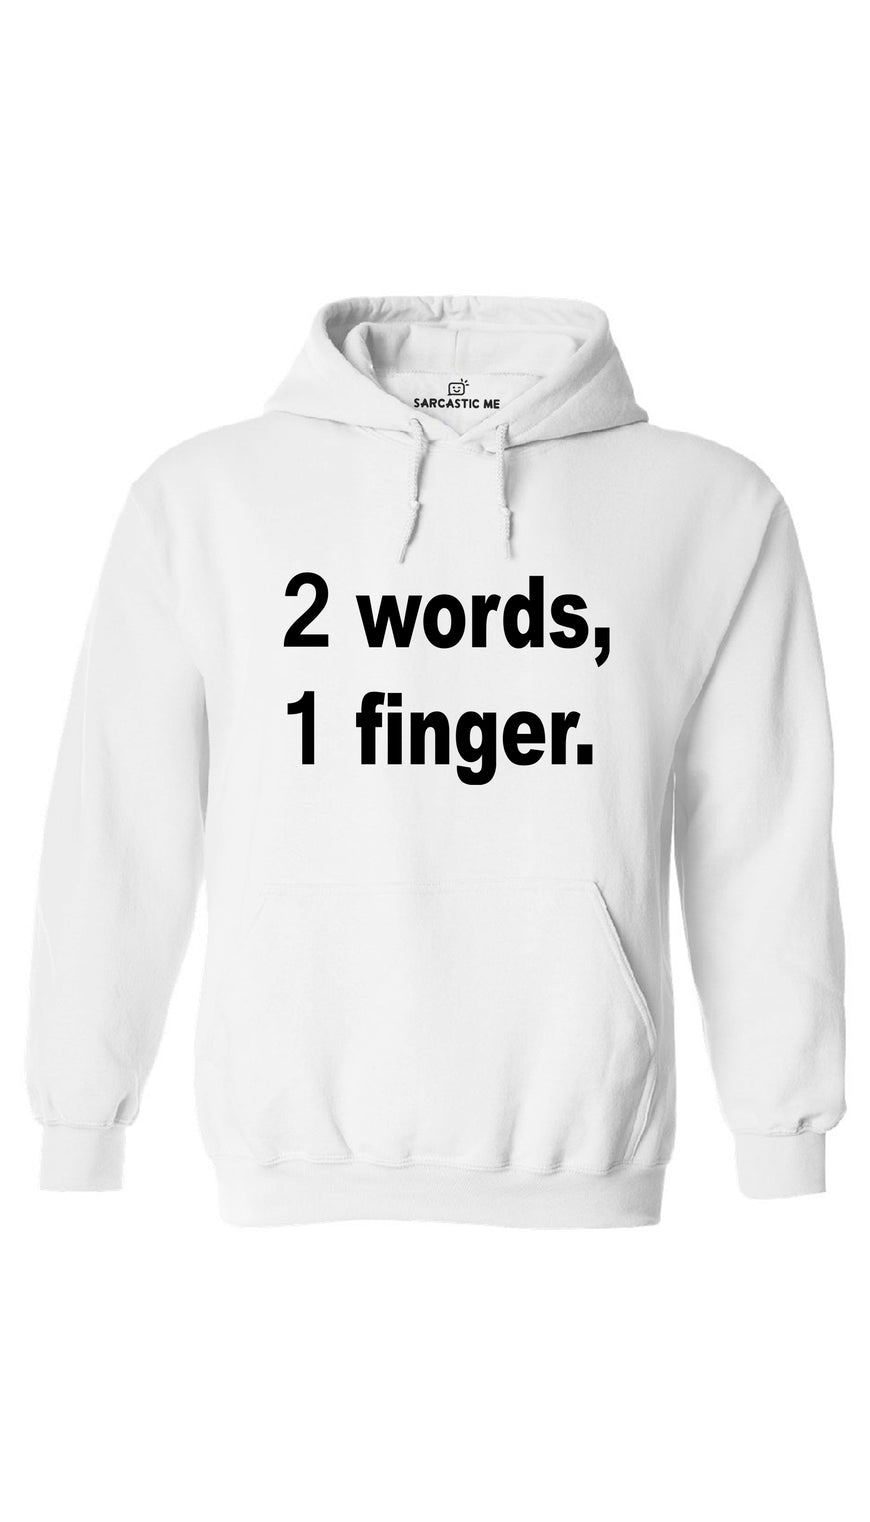 2 Words, 1 Finger White Hoodie | Sarcastic ME